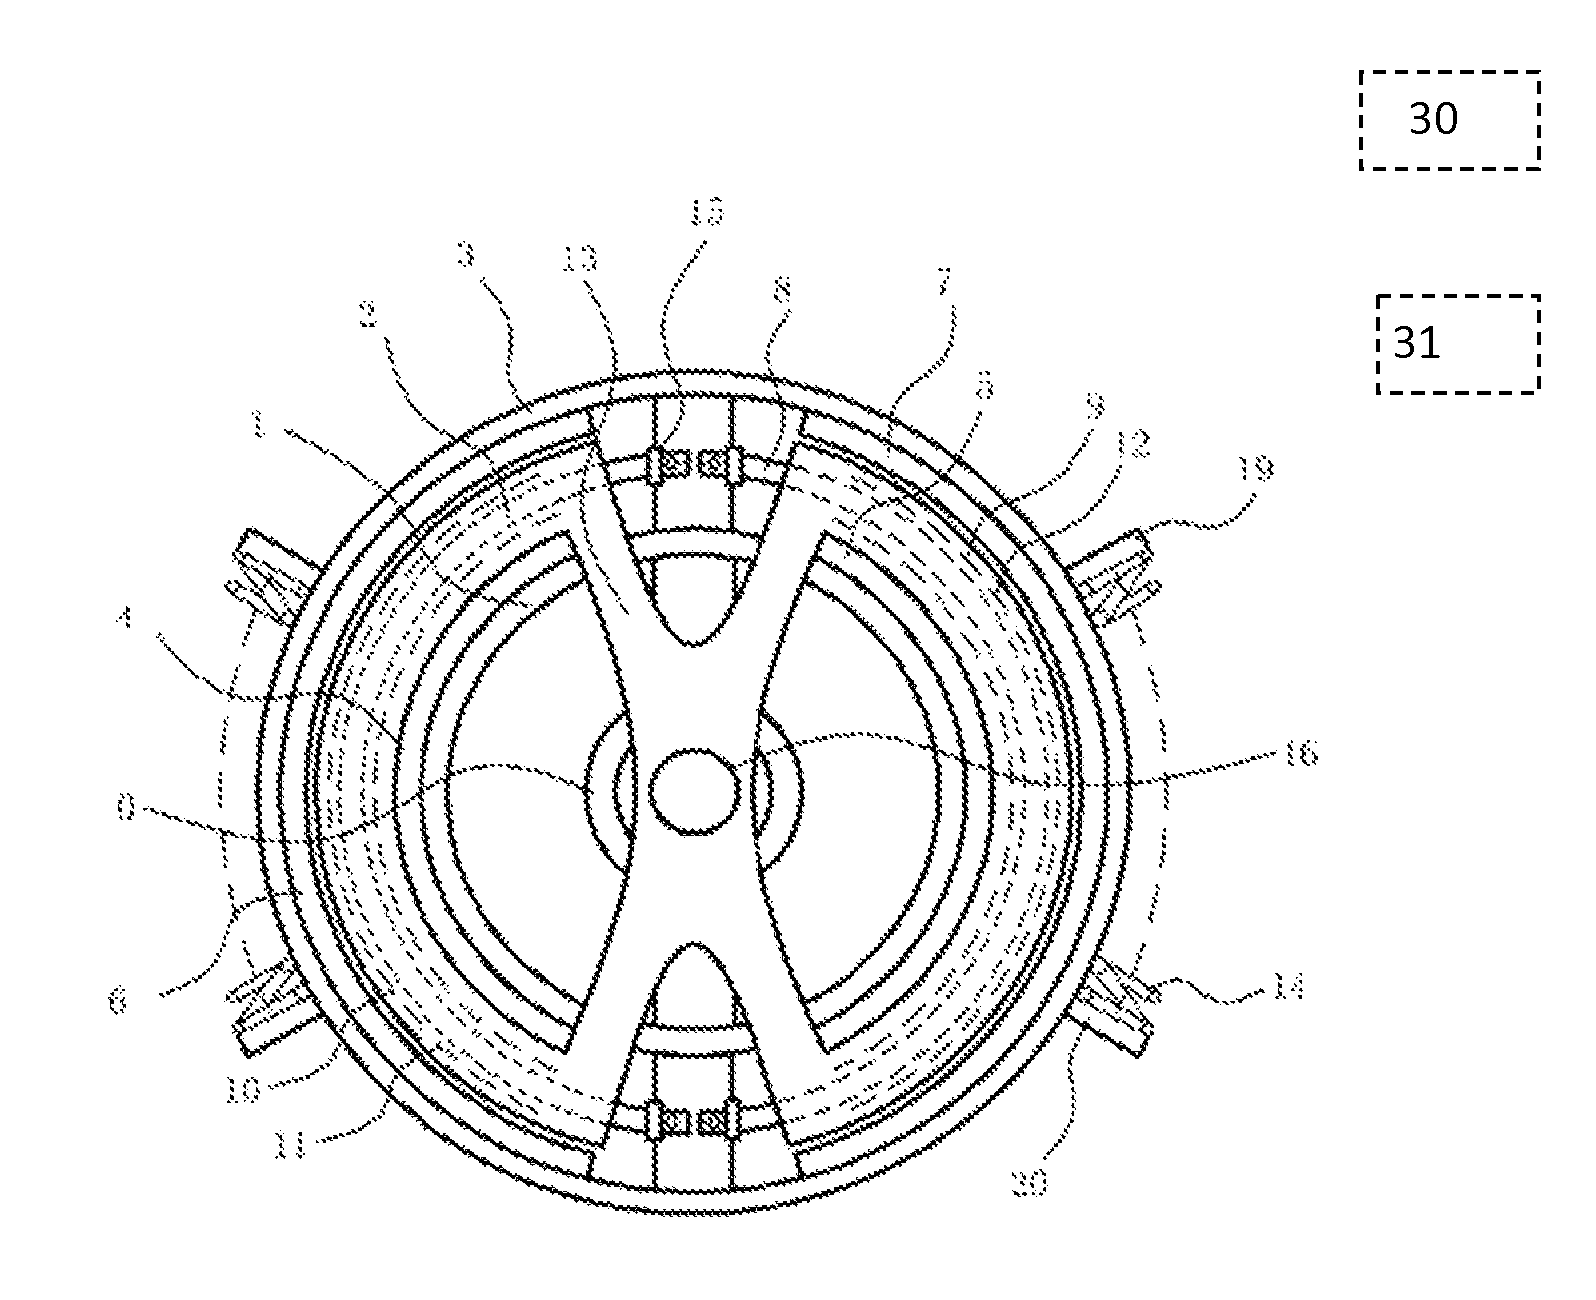 Active electric torsional vibration damper and method to realize the same